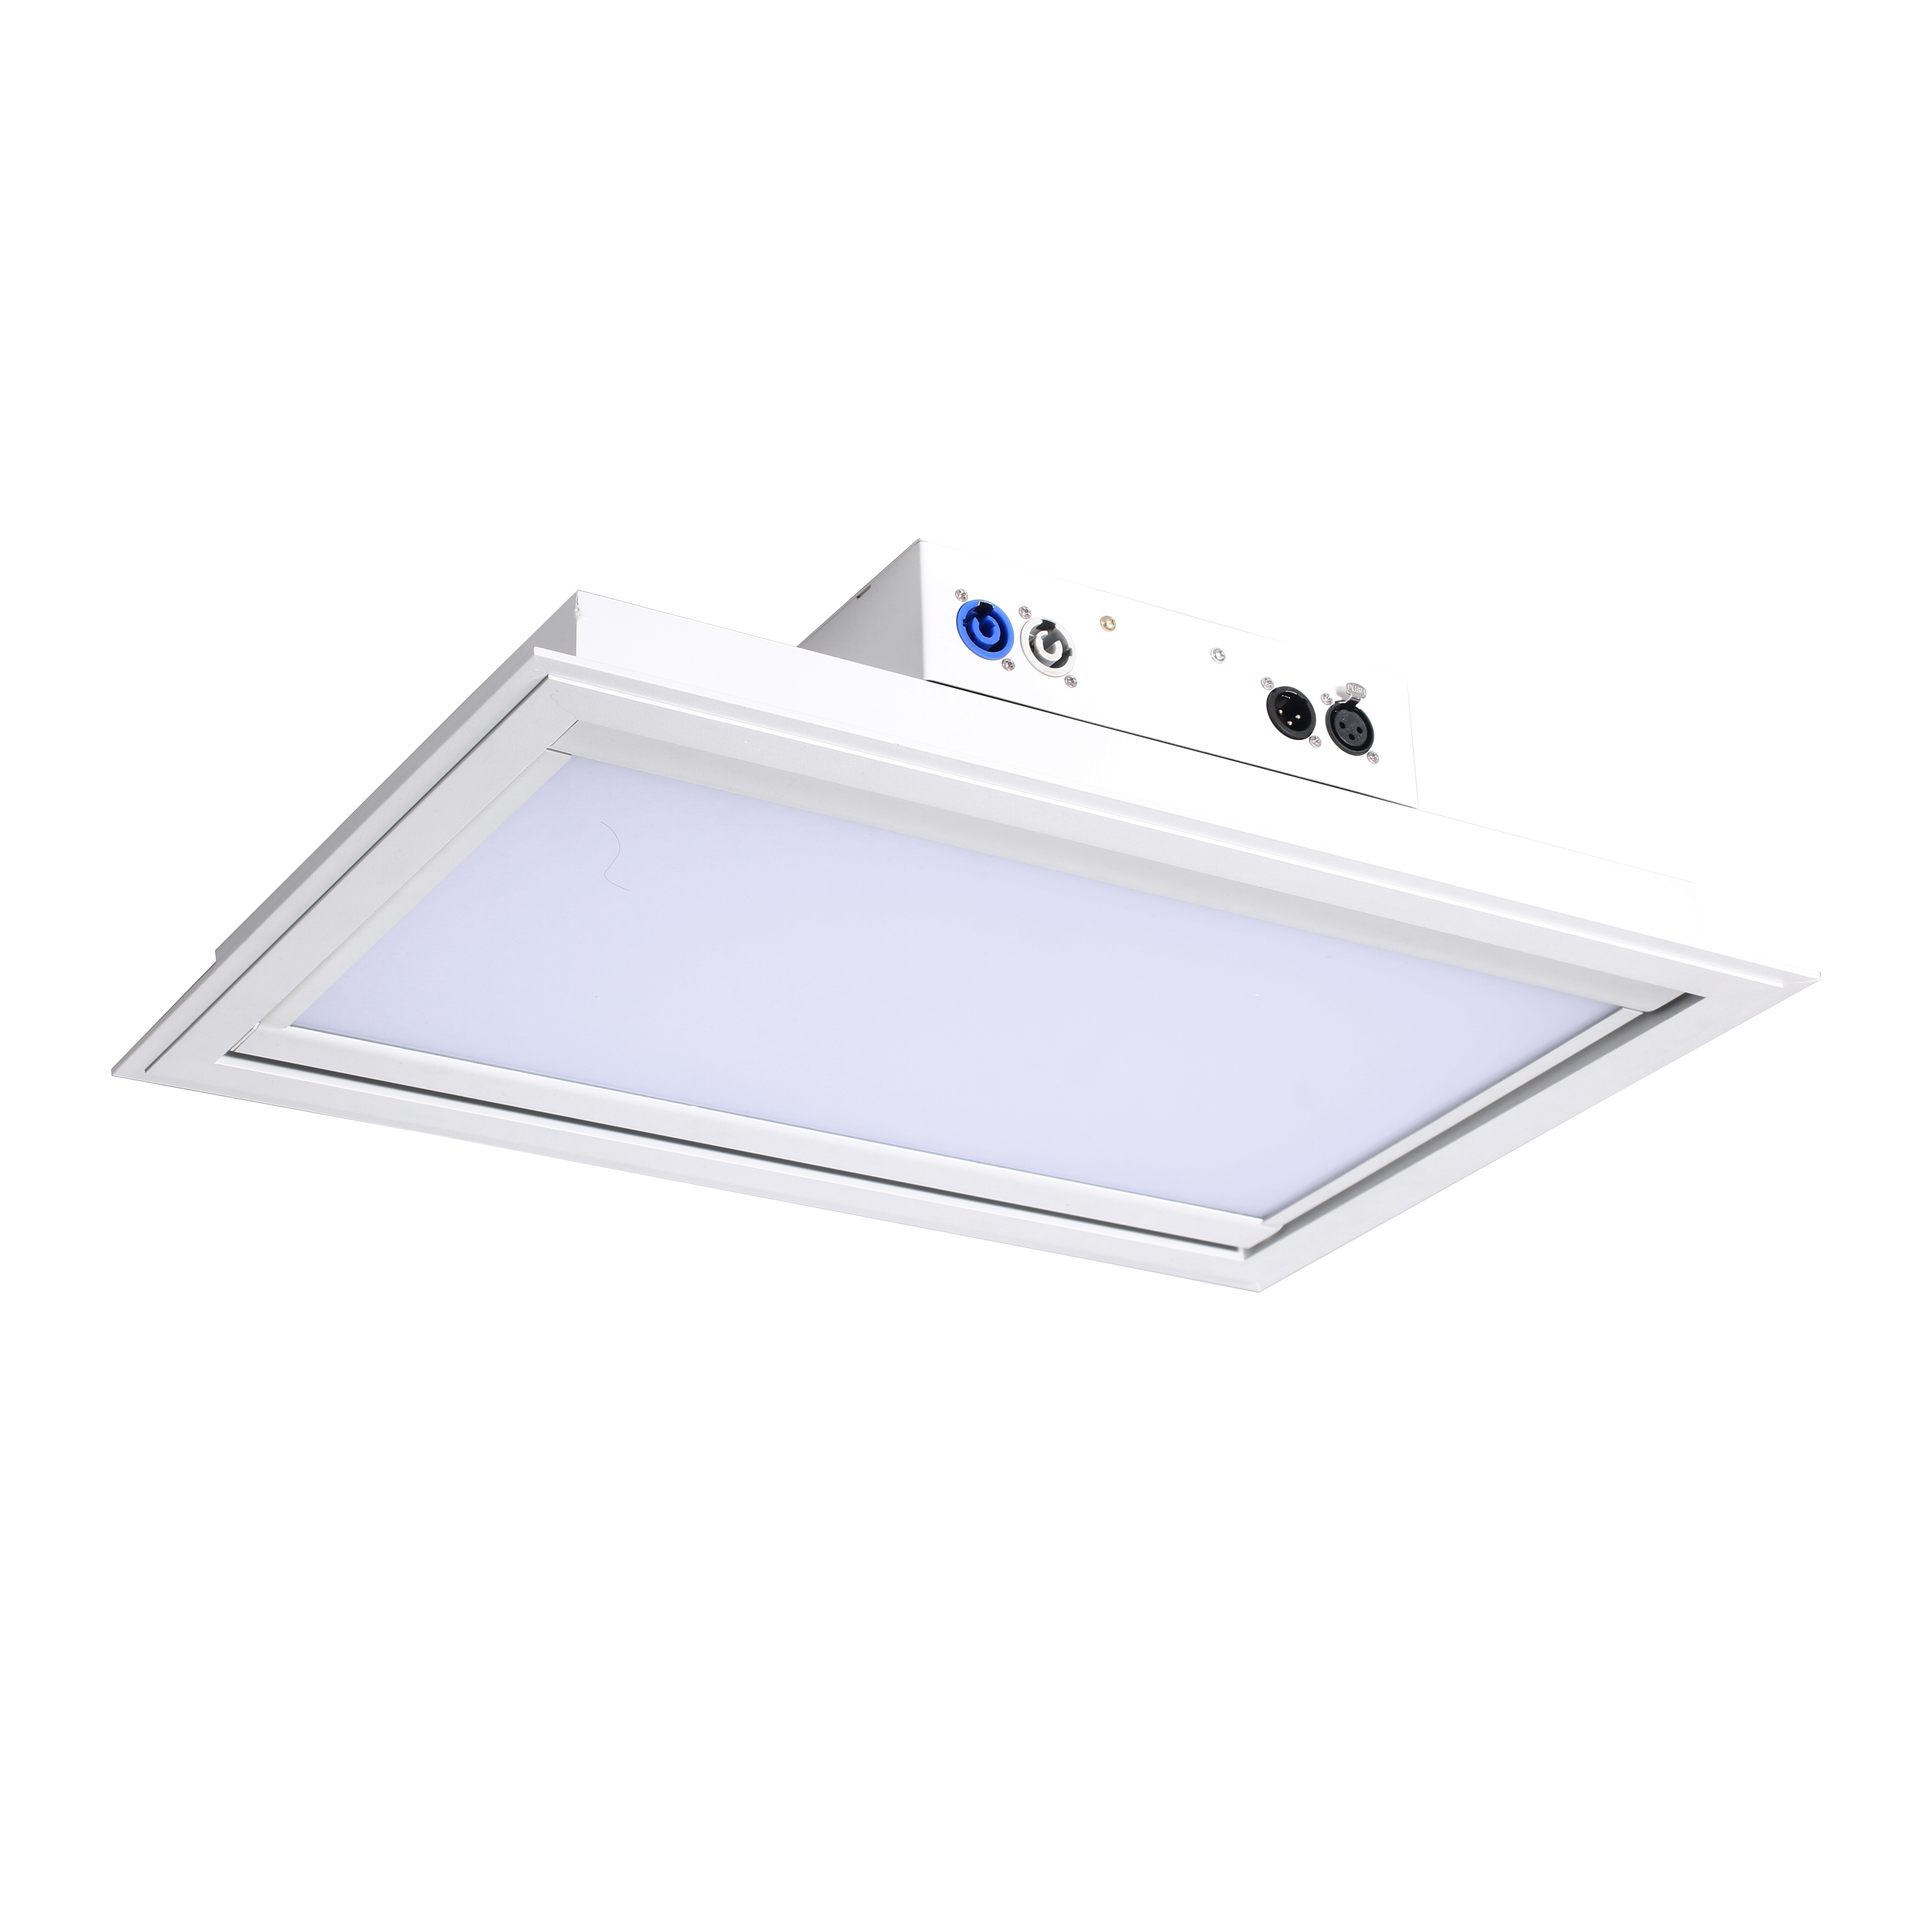 How to use the Embedded Electric Flip LED Soft Panel Light in Conference Hall?